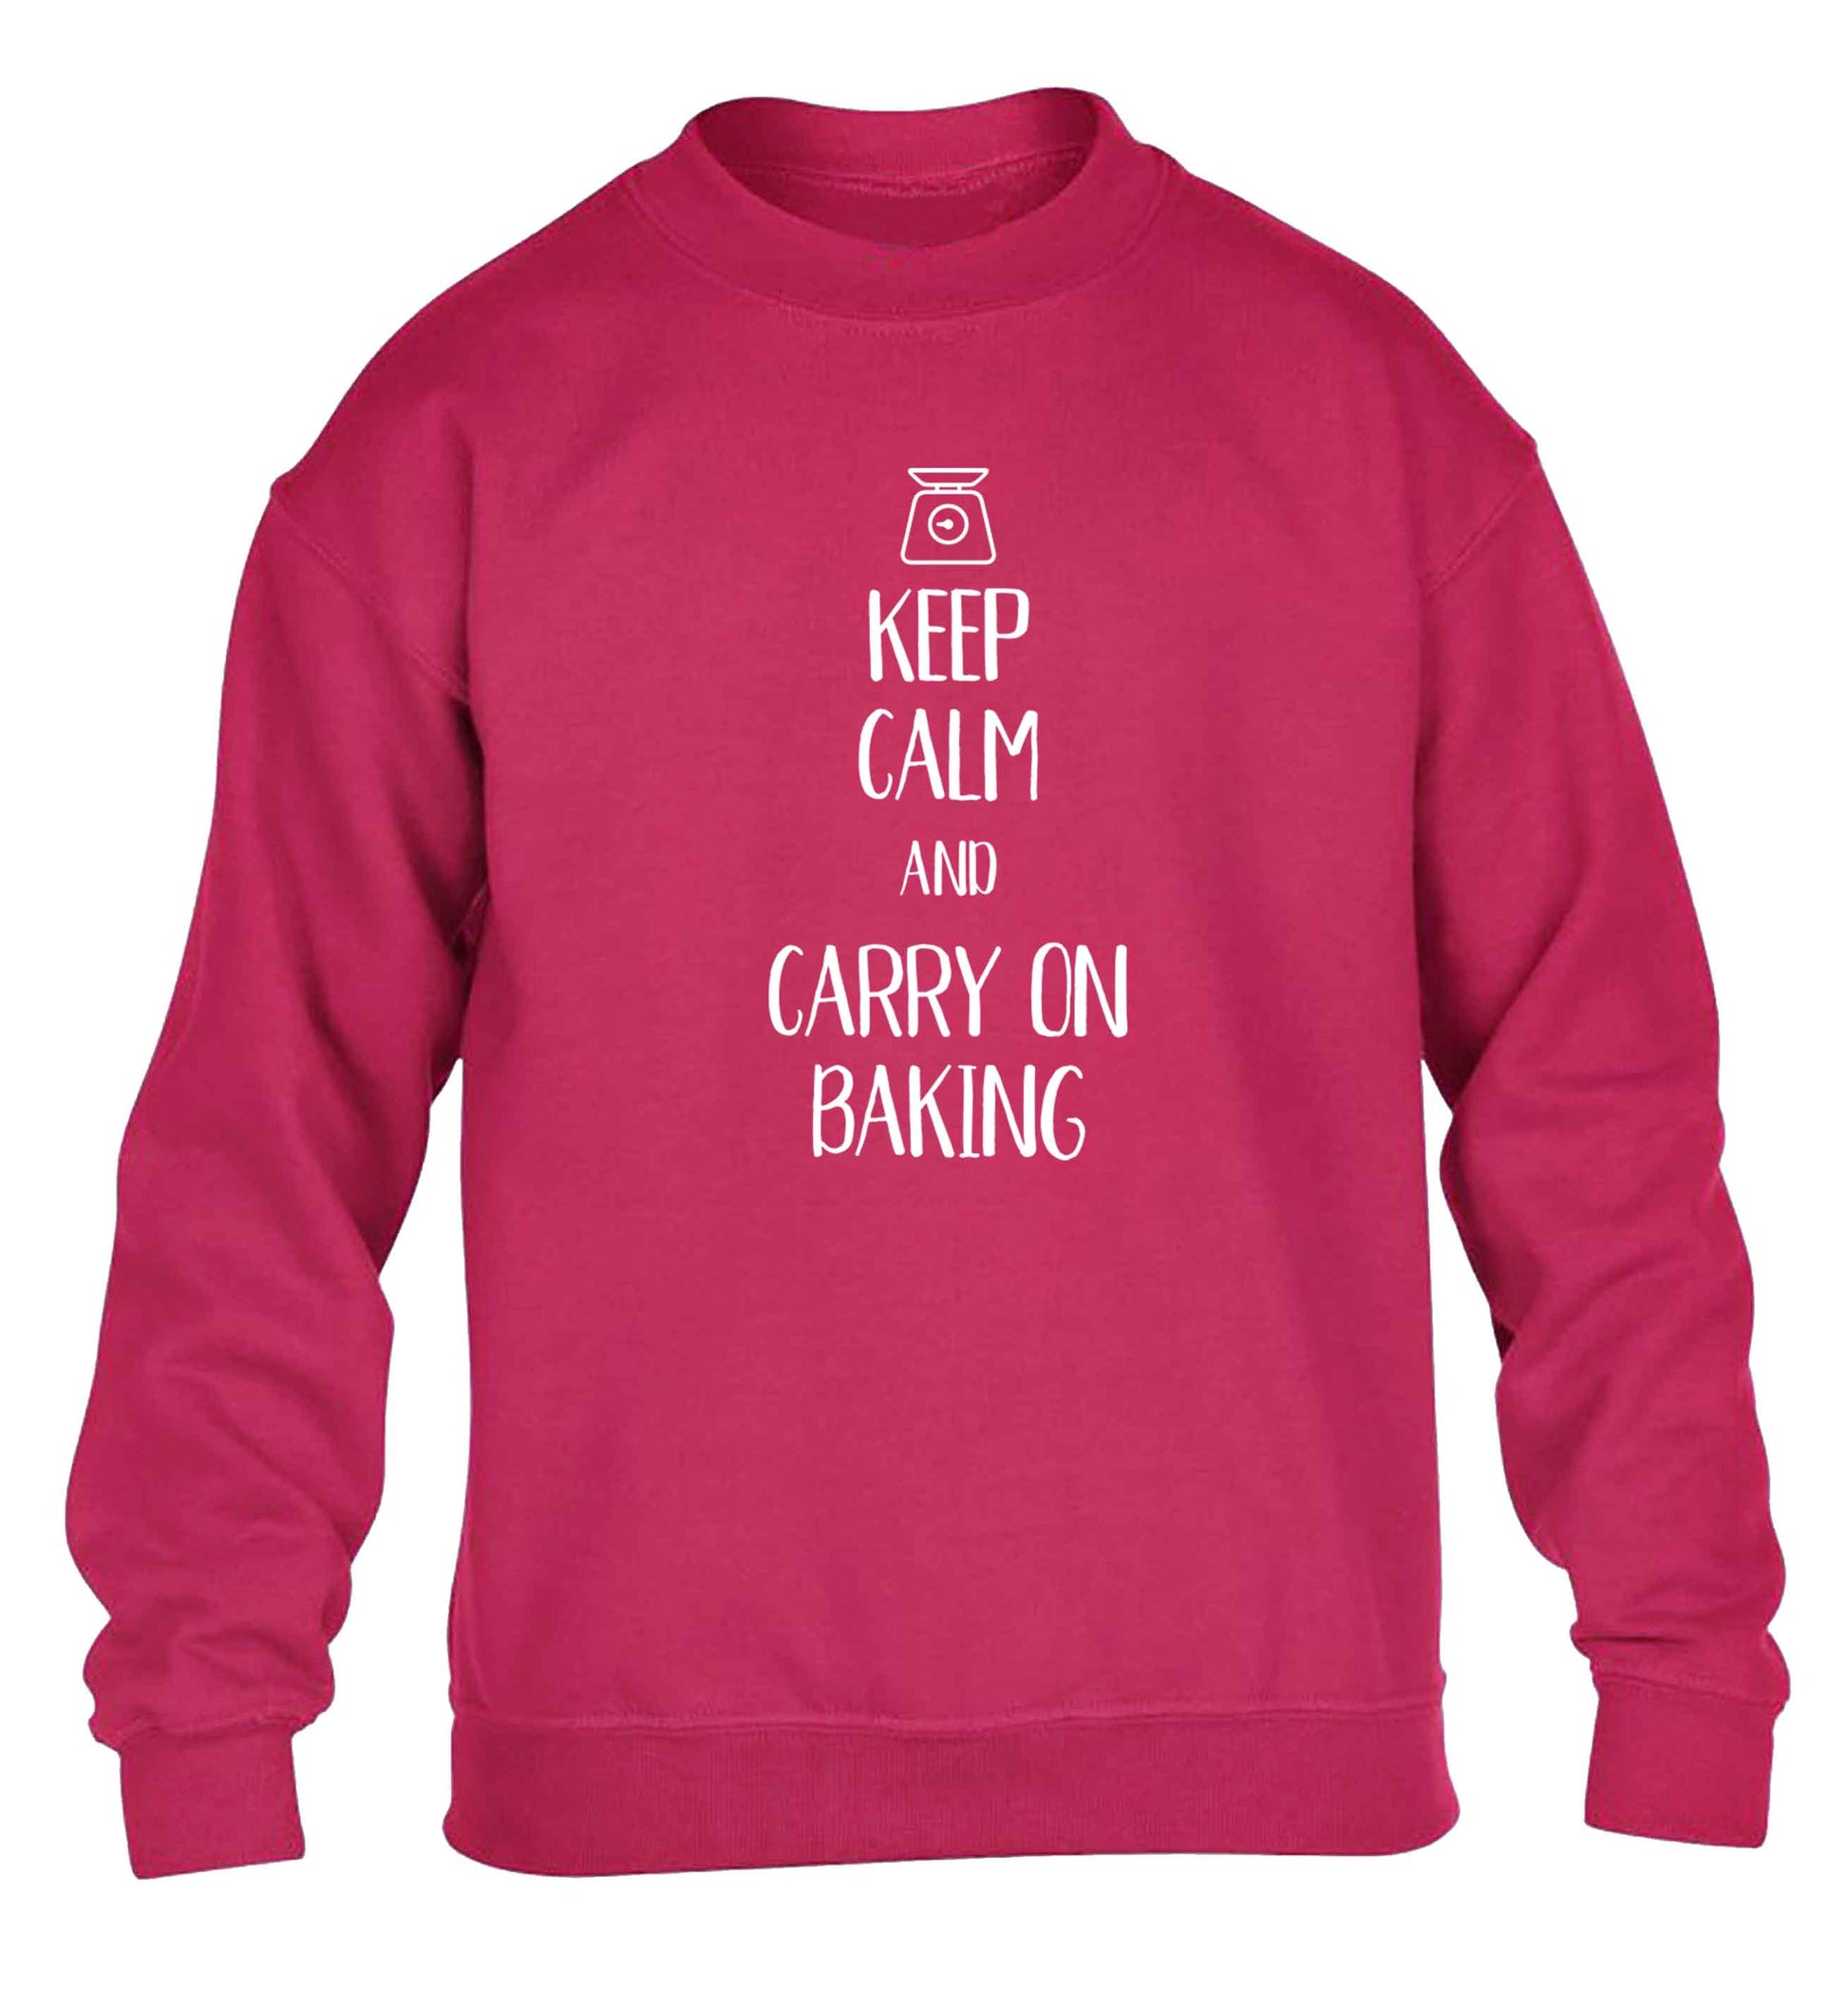 Keep calm and carry on baking children's pink sweater 12-13 Years